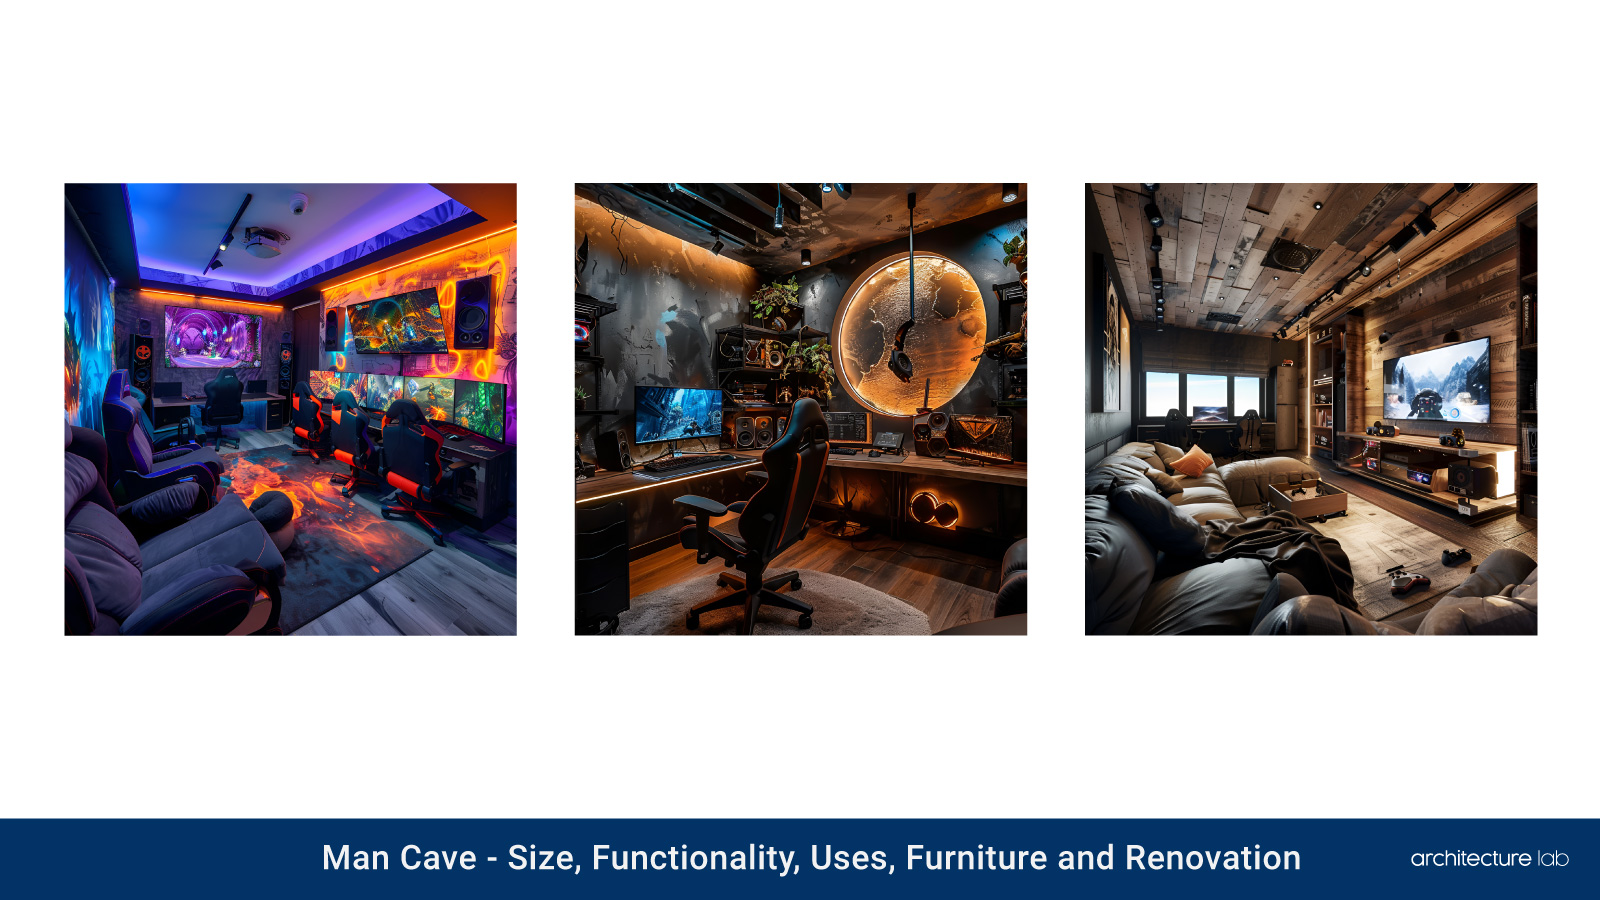 Man cave: size, functionality, uses, furniture, and renovation